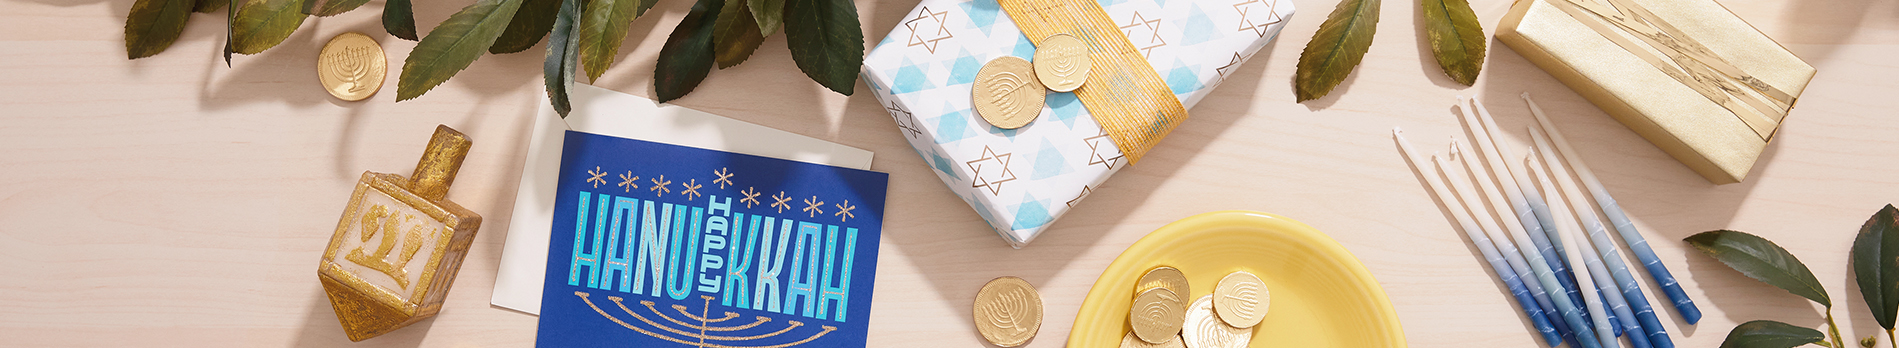 Hanukkah background with dreidel, wrapped gifts, blue candles and gold coins on a tabletop.